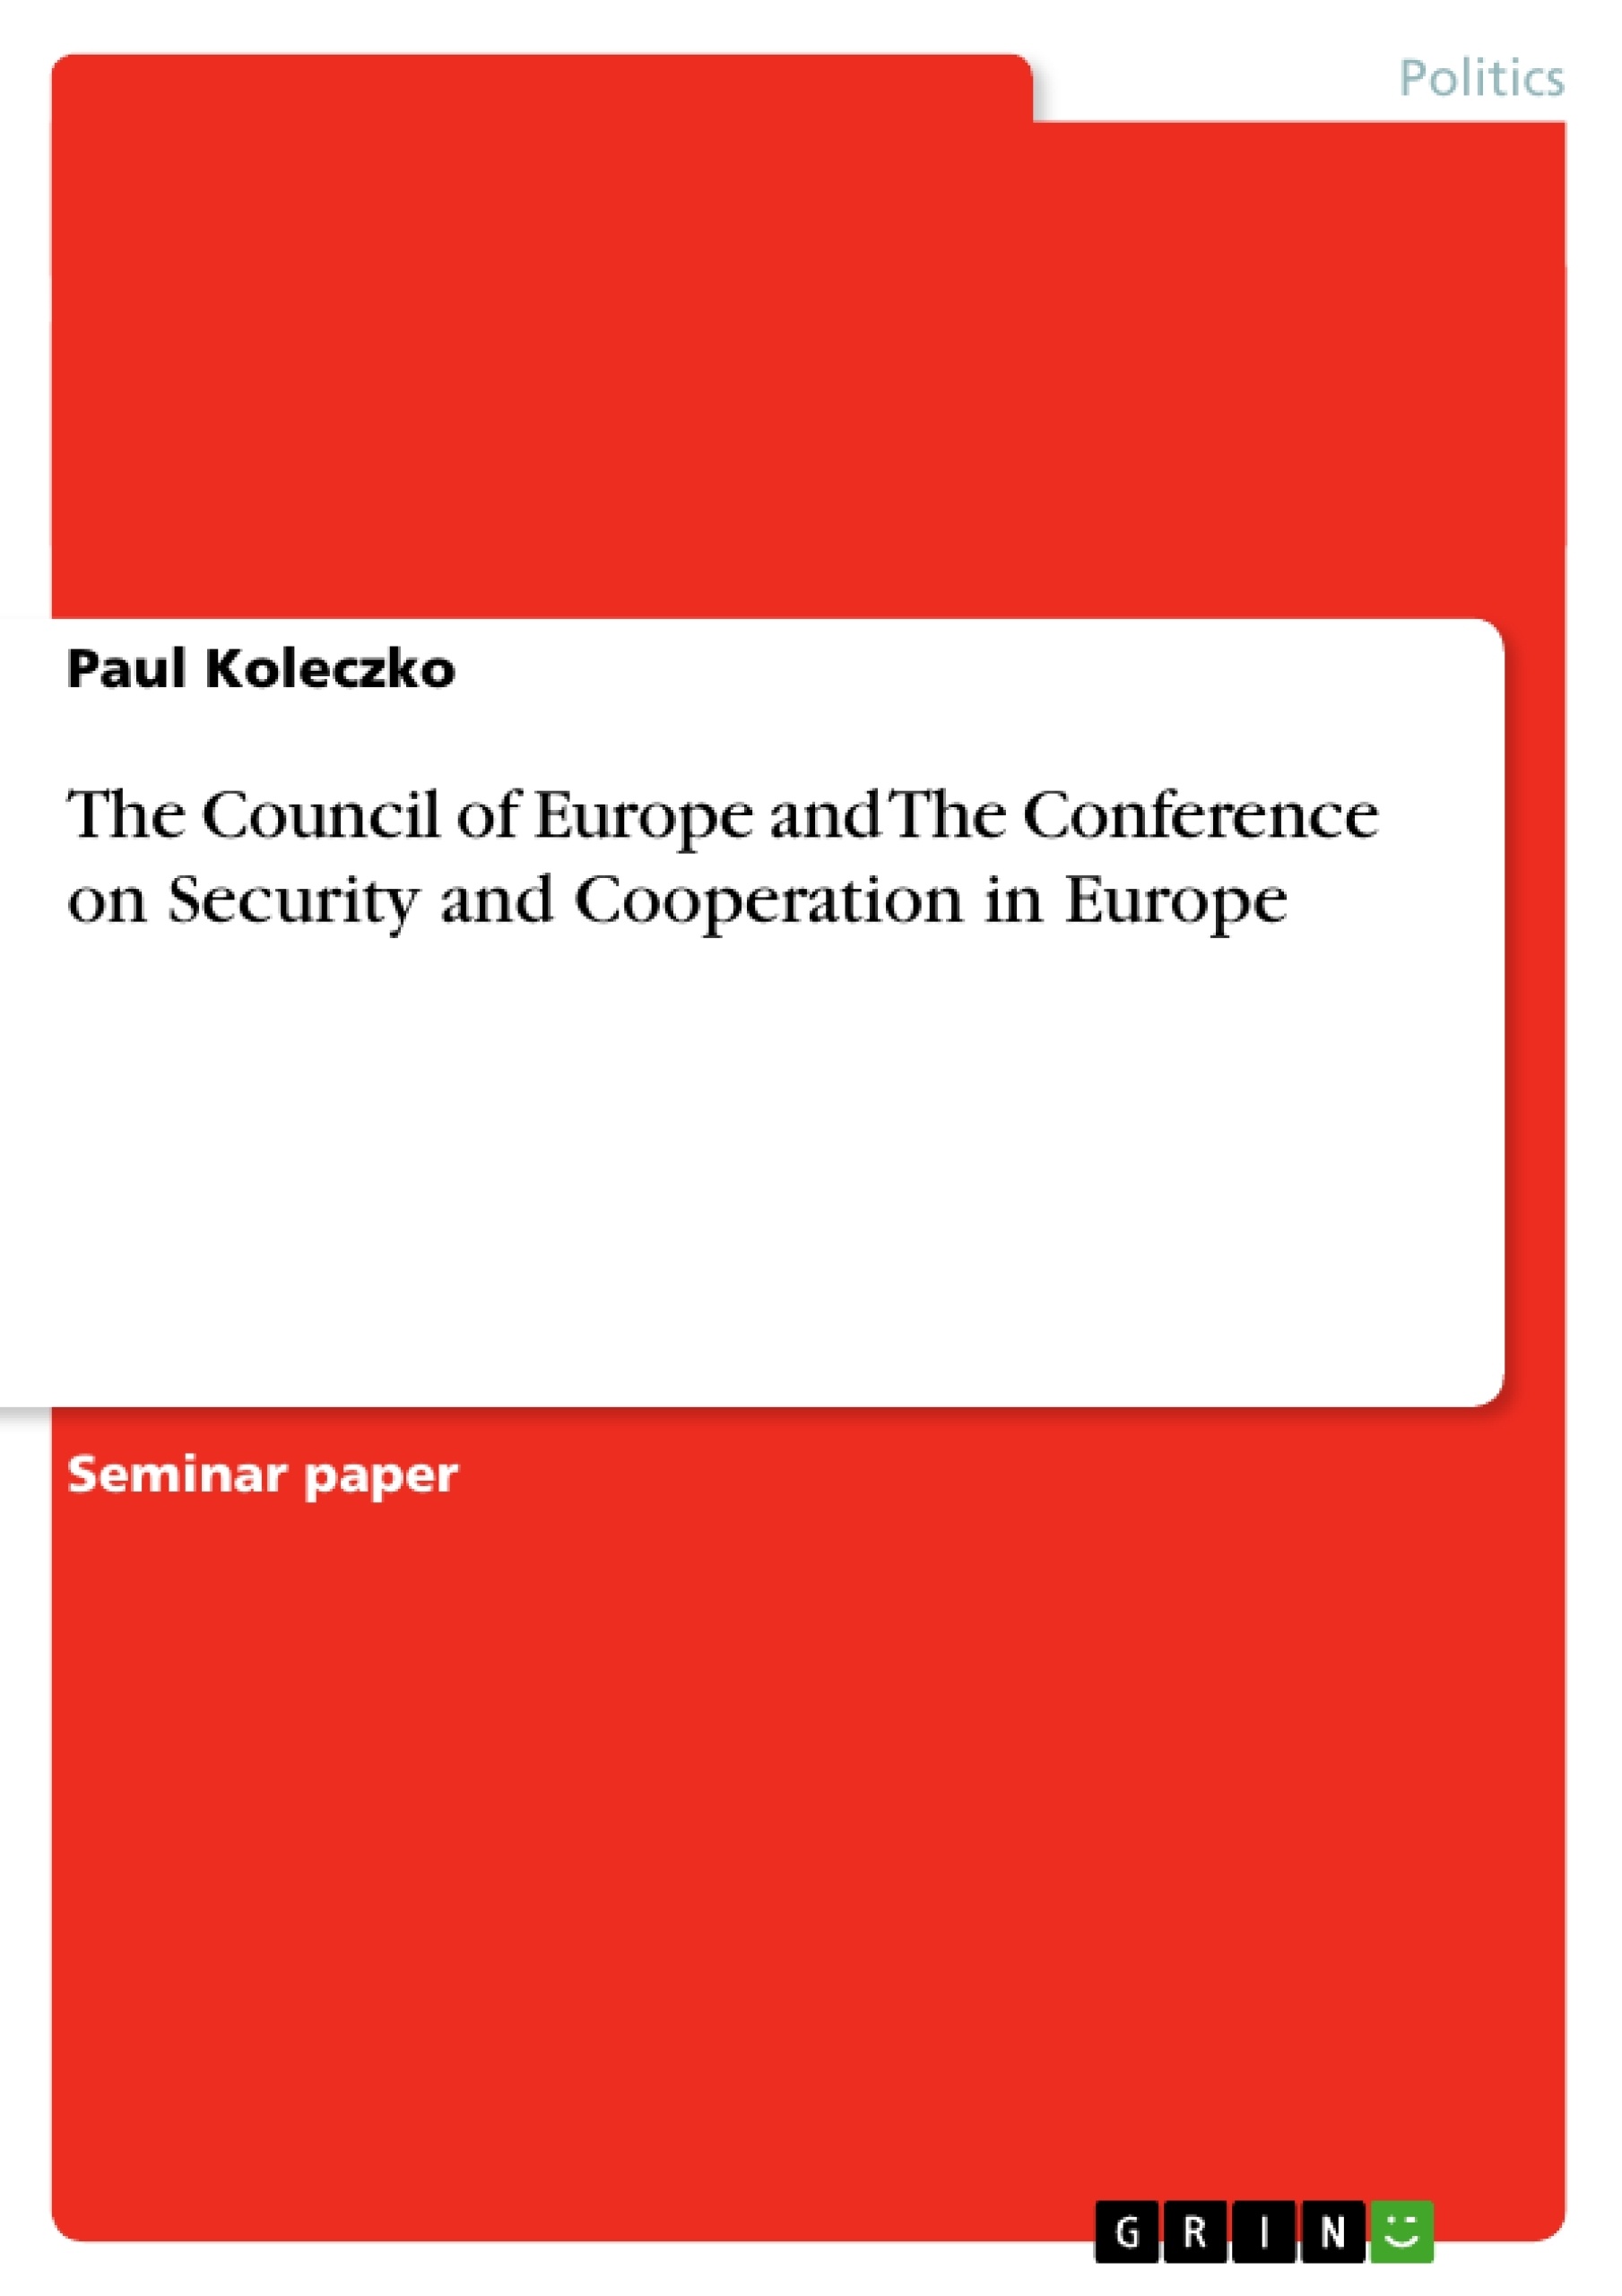 Title: The Council of Europe and The Conference on Security and Cooperation in Europe